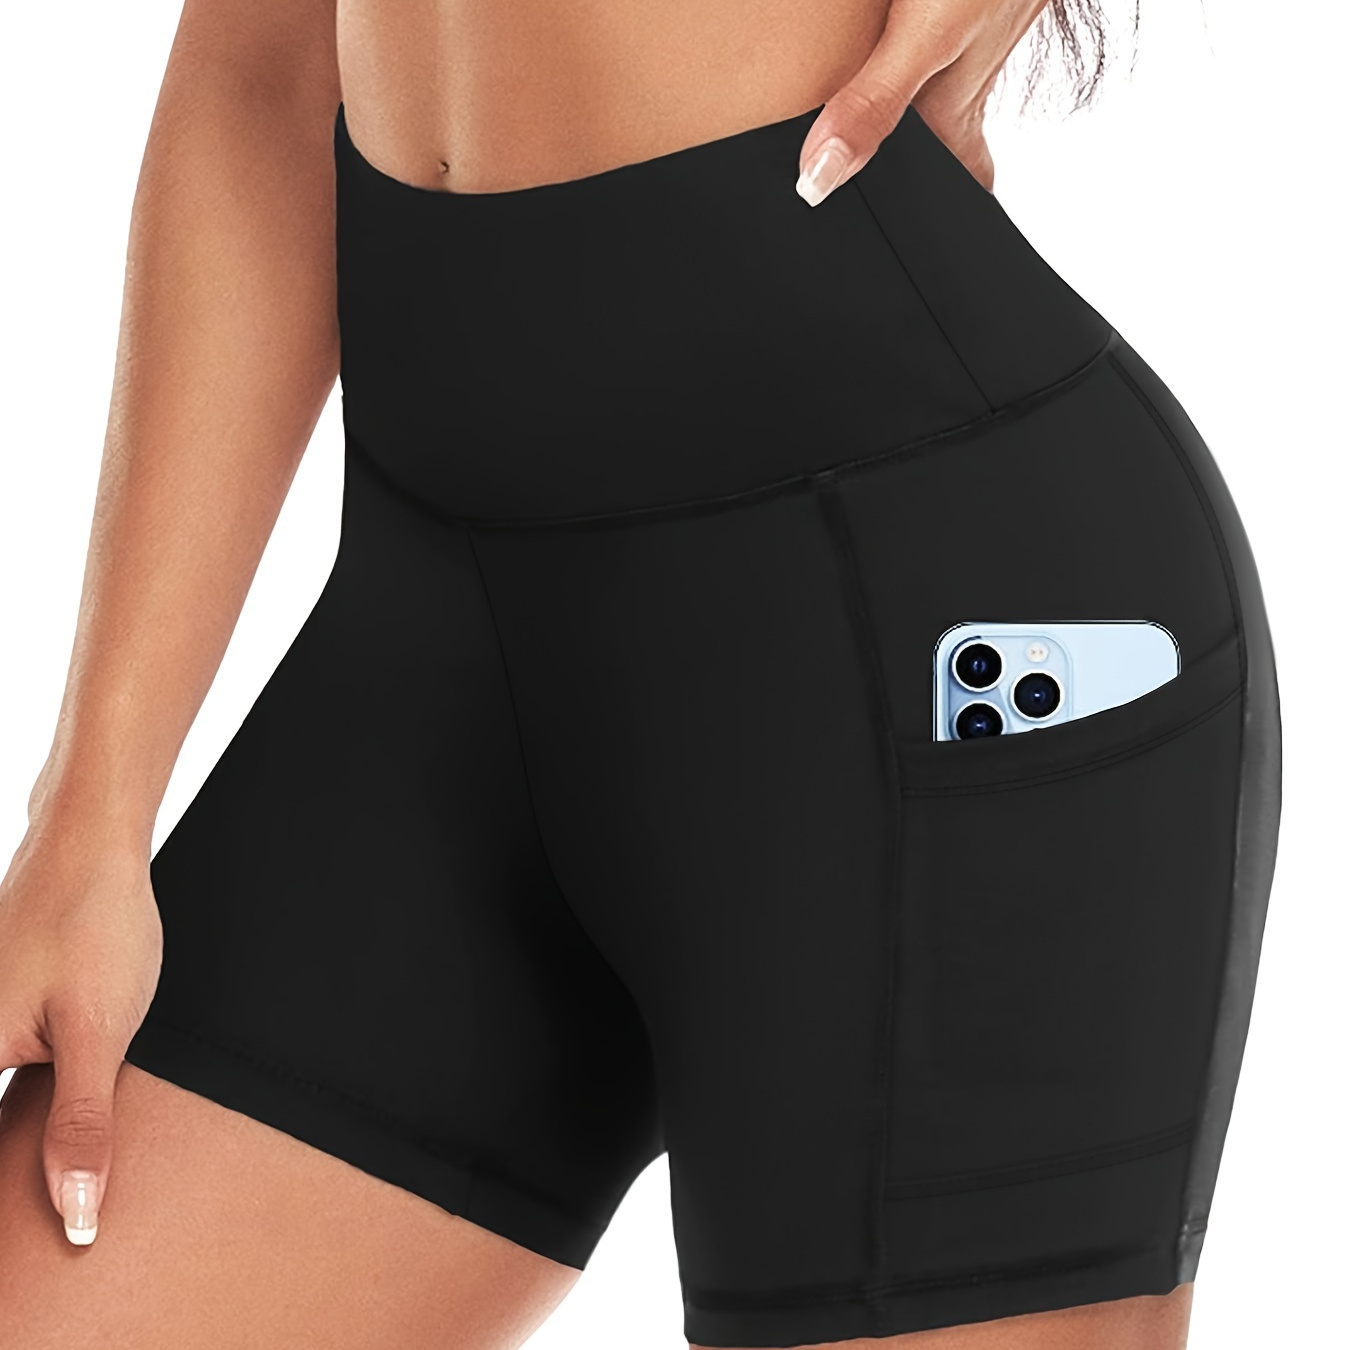 

High Waist Biker Shorts For Women With Side Pockets, Tummy Control Running Exercise Spandex Yoga Shorts